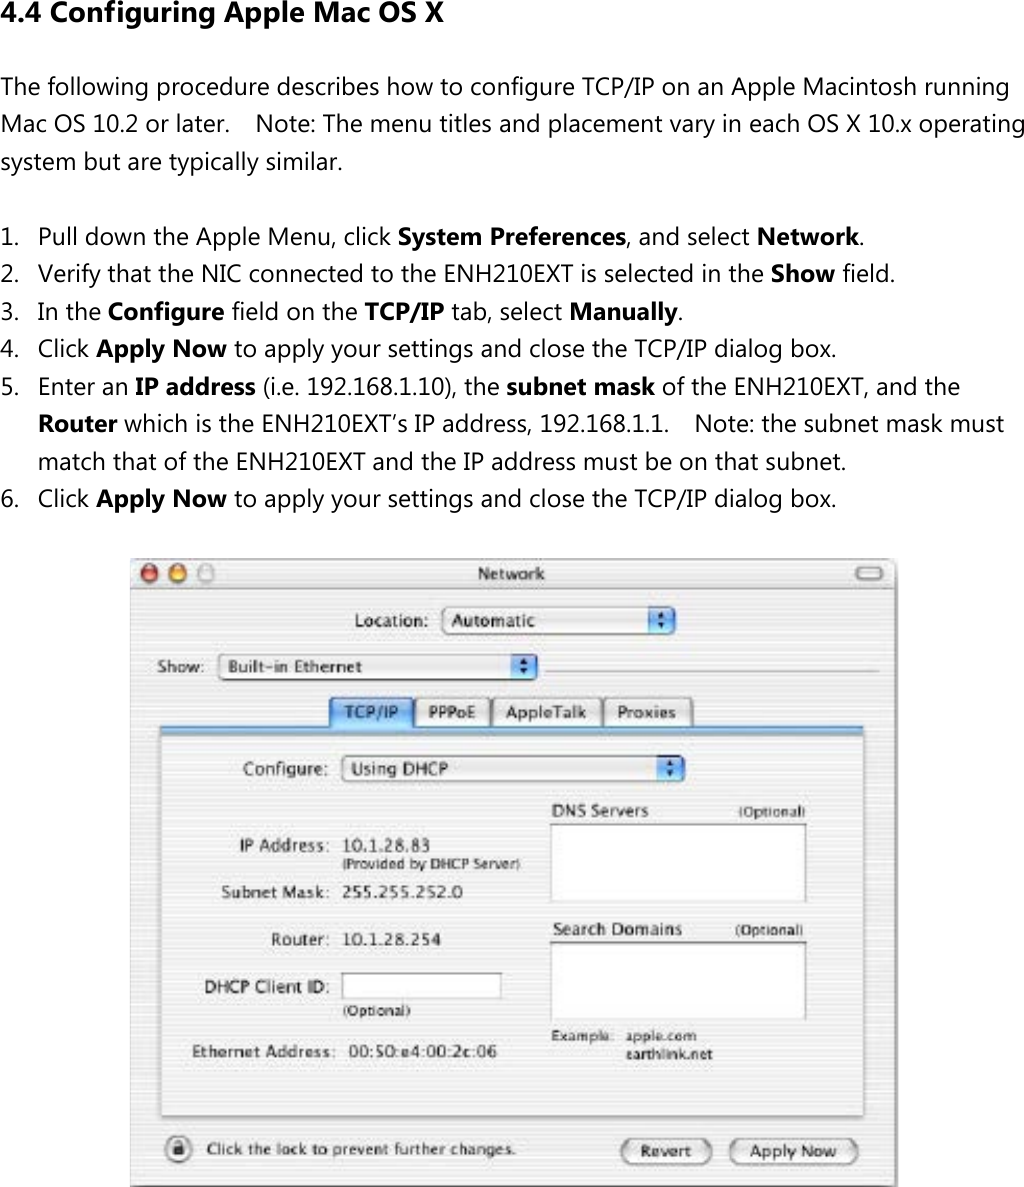 4.4 Configuring Apple Mac OS X The following procedure describes how to configure TCP/IP on an Apple Macintosh running Mac OS 10.2 or later.    Note: The menu titles and placement vary in each OS X 10.x operating system but are typically similar.  1. Pull down the Apple Menu, click System Preferences, and select Network.   2. Verify that the NIC connected to the ENH210EXT is selected in the Show field.   3. In the Configure field on the TCP/IP tab, select Manually.   4. Click Apply Now to apply your settings and close the TCP/IP dialog box. 5. Enter an IP address (i.e. 192.168.1.10), the subnet mask of the ENH210EXT, and the Router which is the ENH210EXT’s IP address, 192.168.1.1.    Note: the subnet mask must match that of the ENH210EXT and the IP address must be on that subnet. 6. Click Apply Now to apply your settings and close the TCP/IP dialog box.           